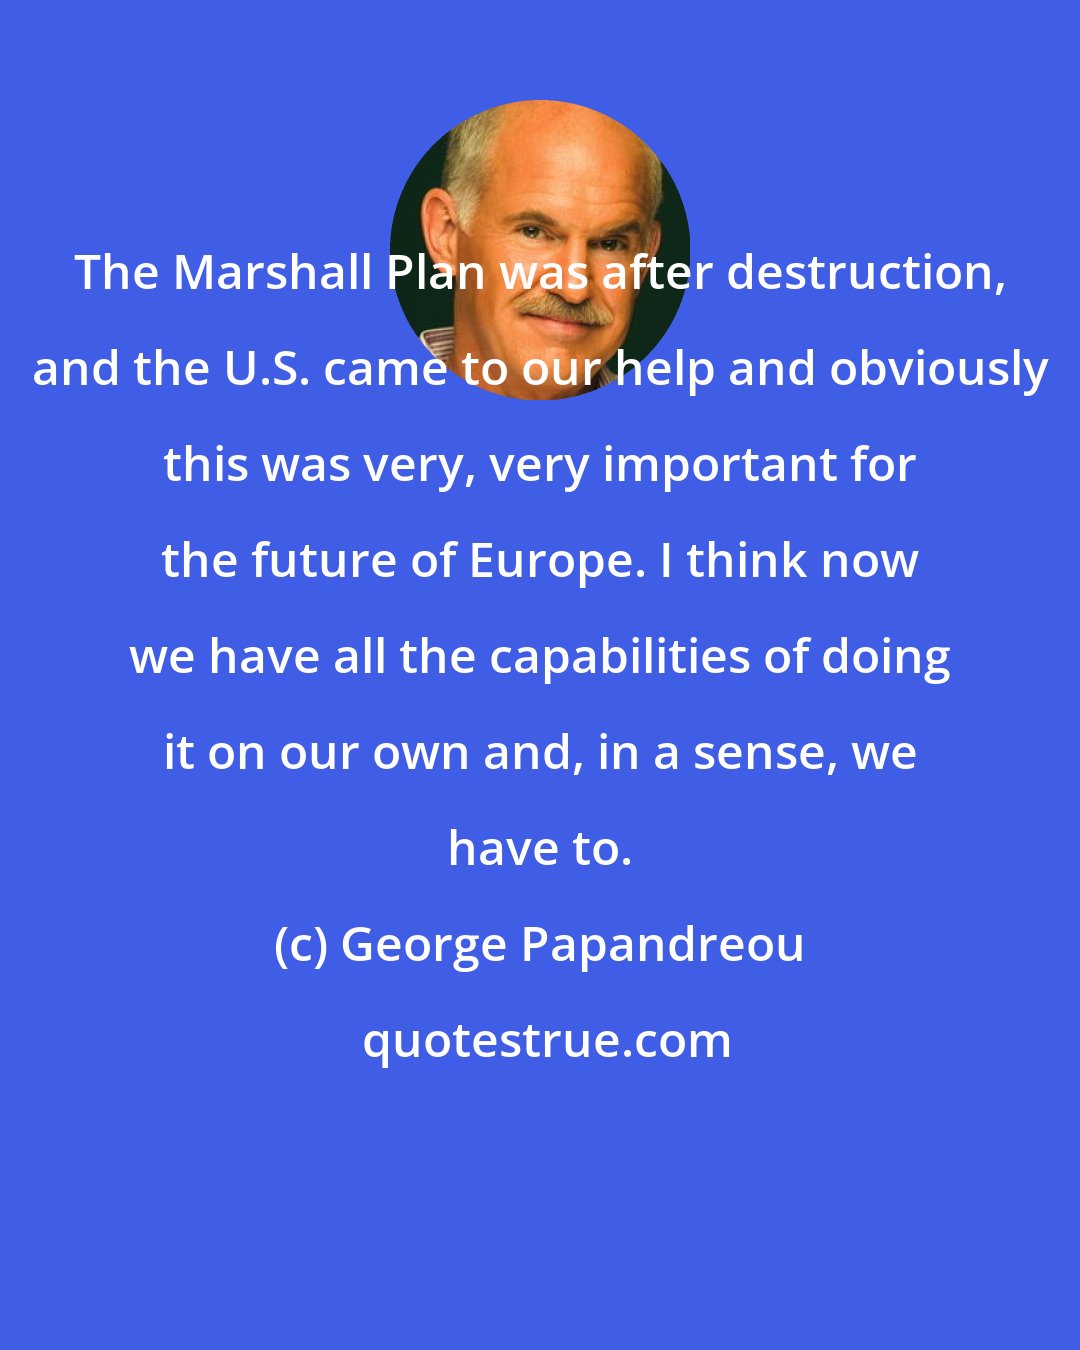 George Papandreou: The Marshall Plan was after destruction, and the U.S. came to our help and obviously this was very, very important for the future of Europe. I think now we have all the capabilities of doing it on our own and, in a sense, we have to.